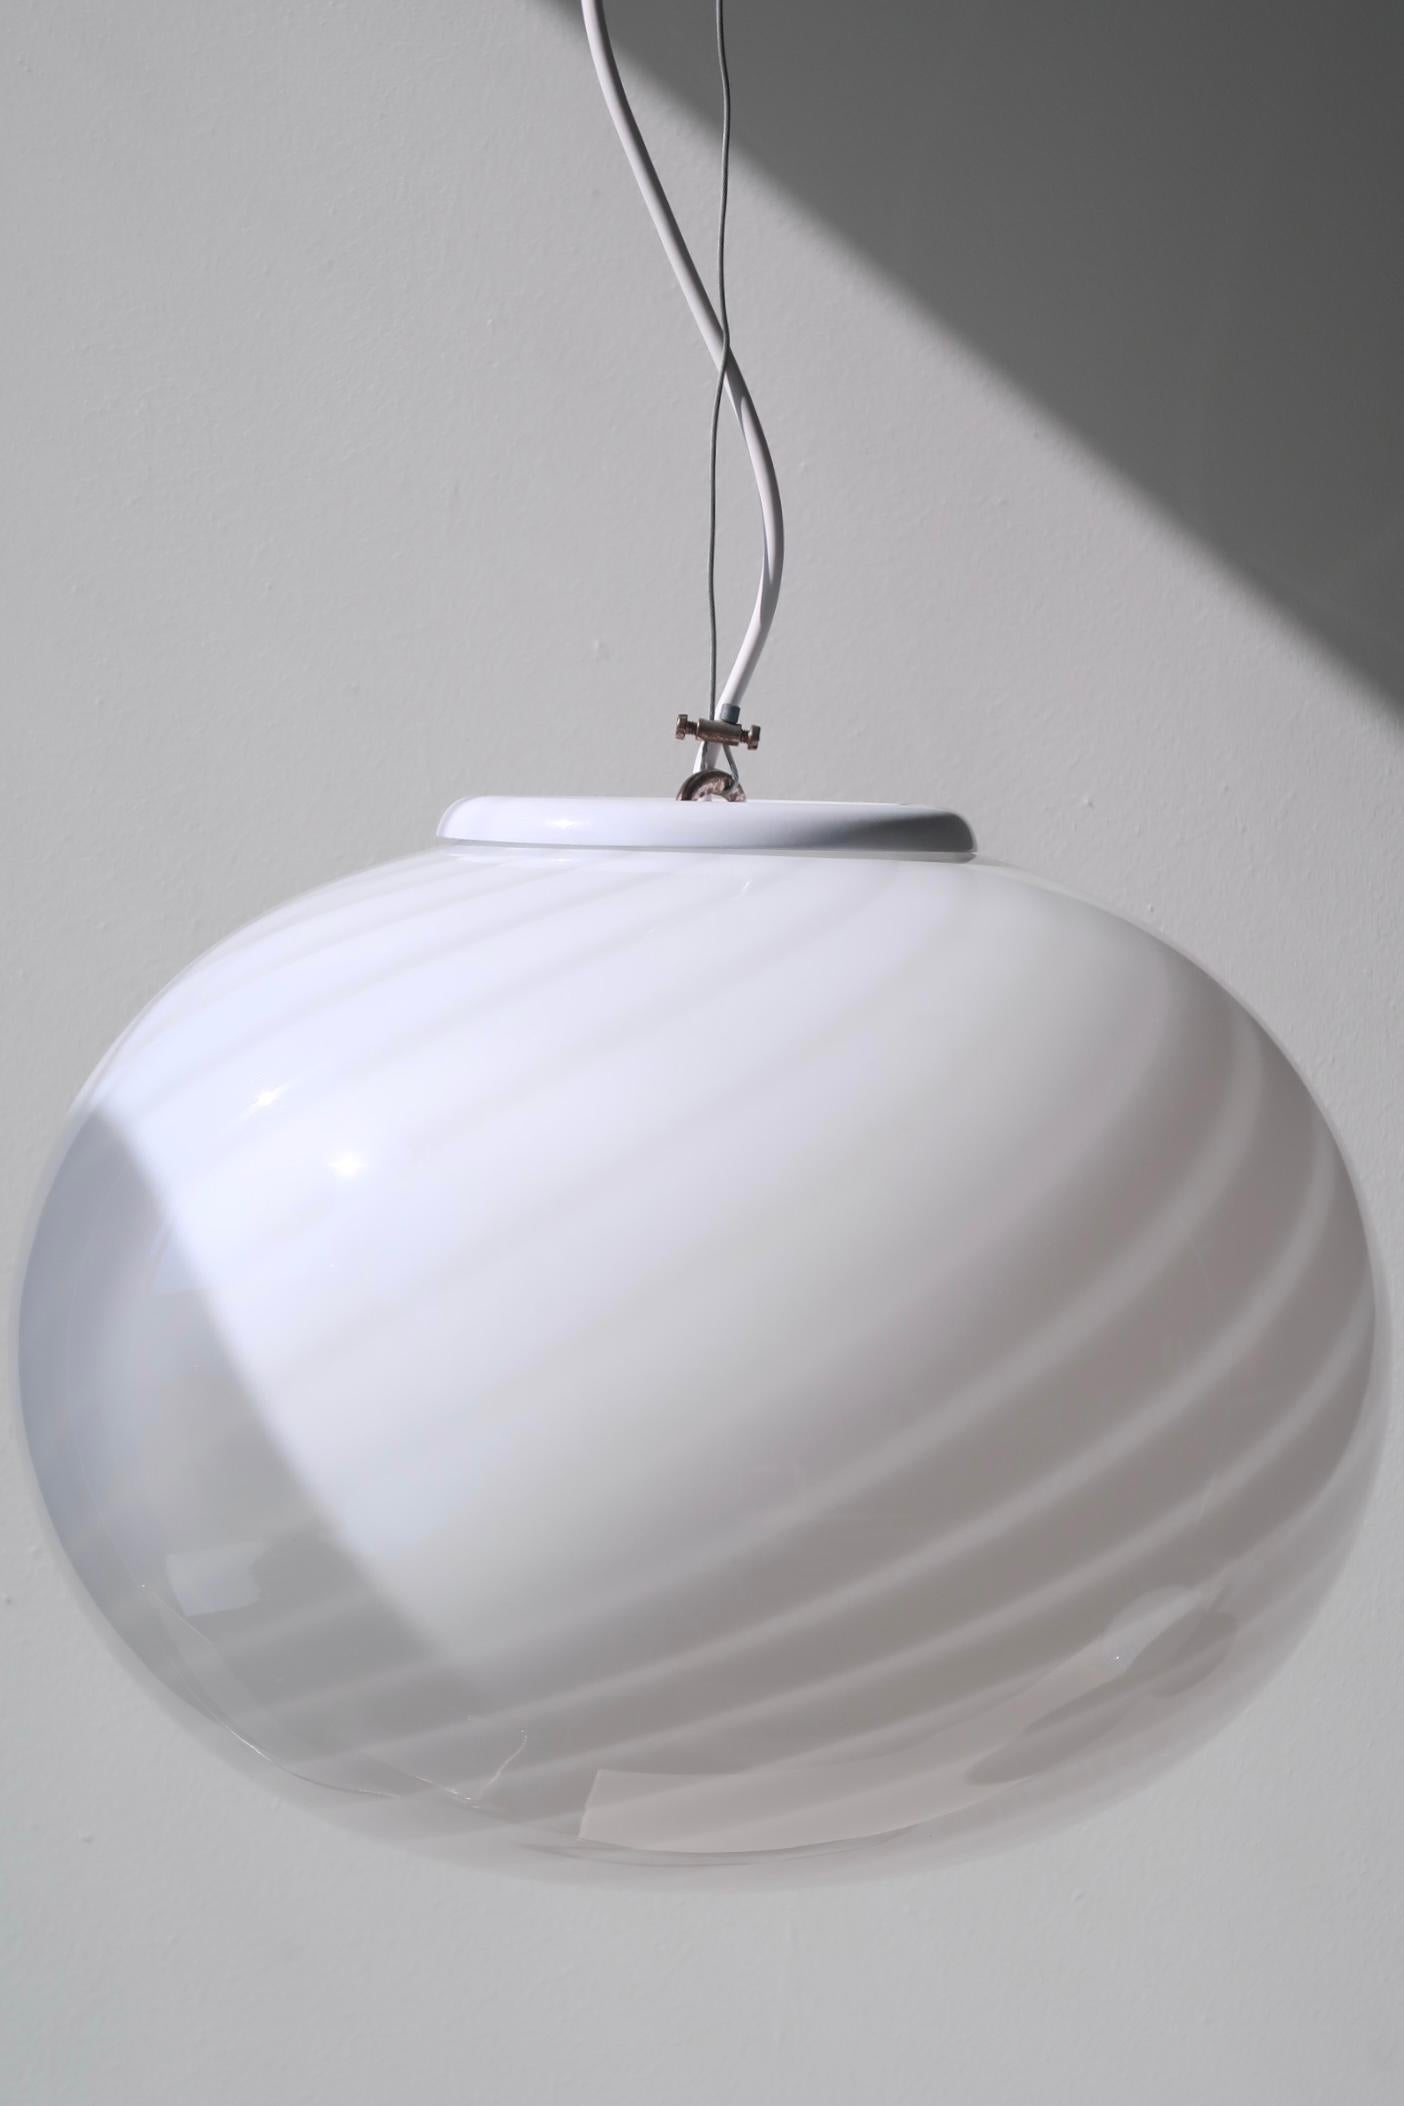 Vintage Murano pendant ceiling lamp in white glass. The glass is hand-blown in an oval shape with a beautiful swirl pattern. Handmade in Italy, 1970s, and comes with original label and adjustable suspension. D:35 cm H:25 cm (glass)

